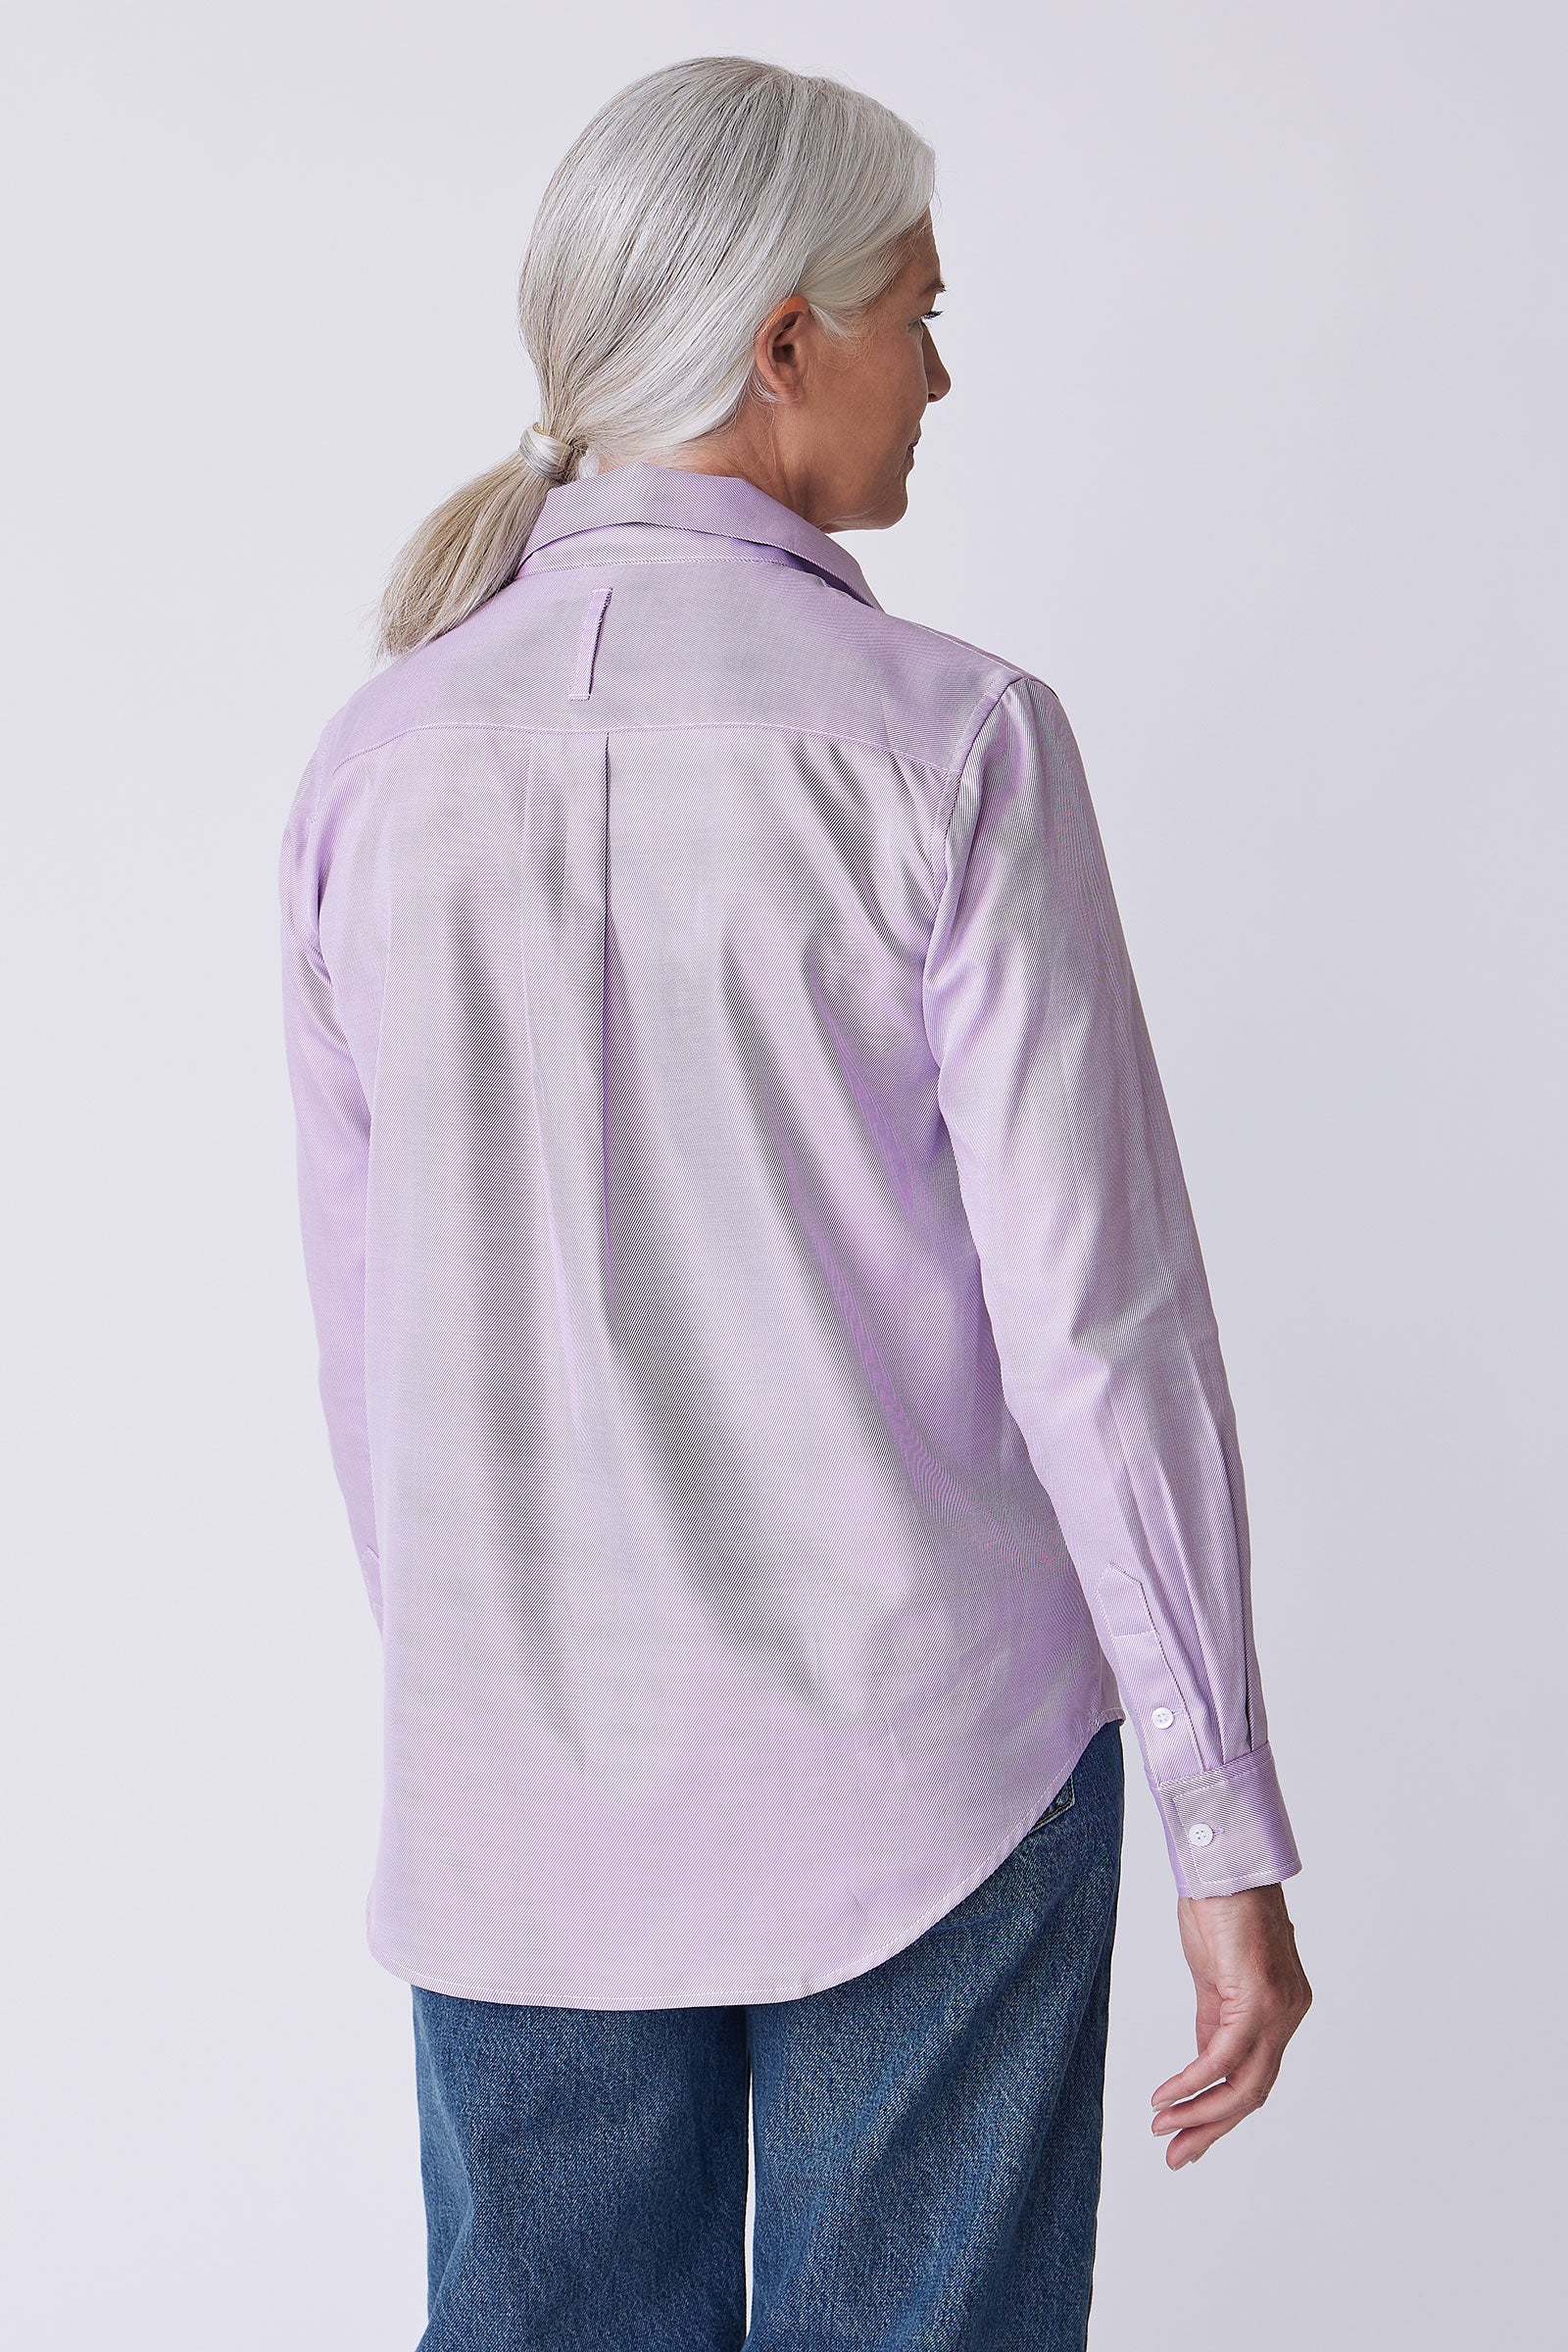 Ginna Box Pleat Tailored Shirt in Violet soft twill on model front view hand in pocketl